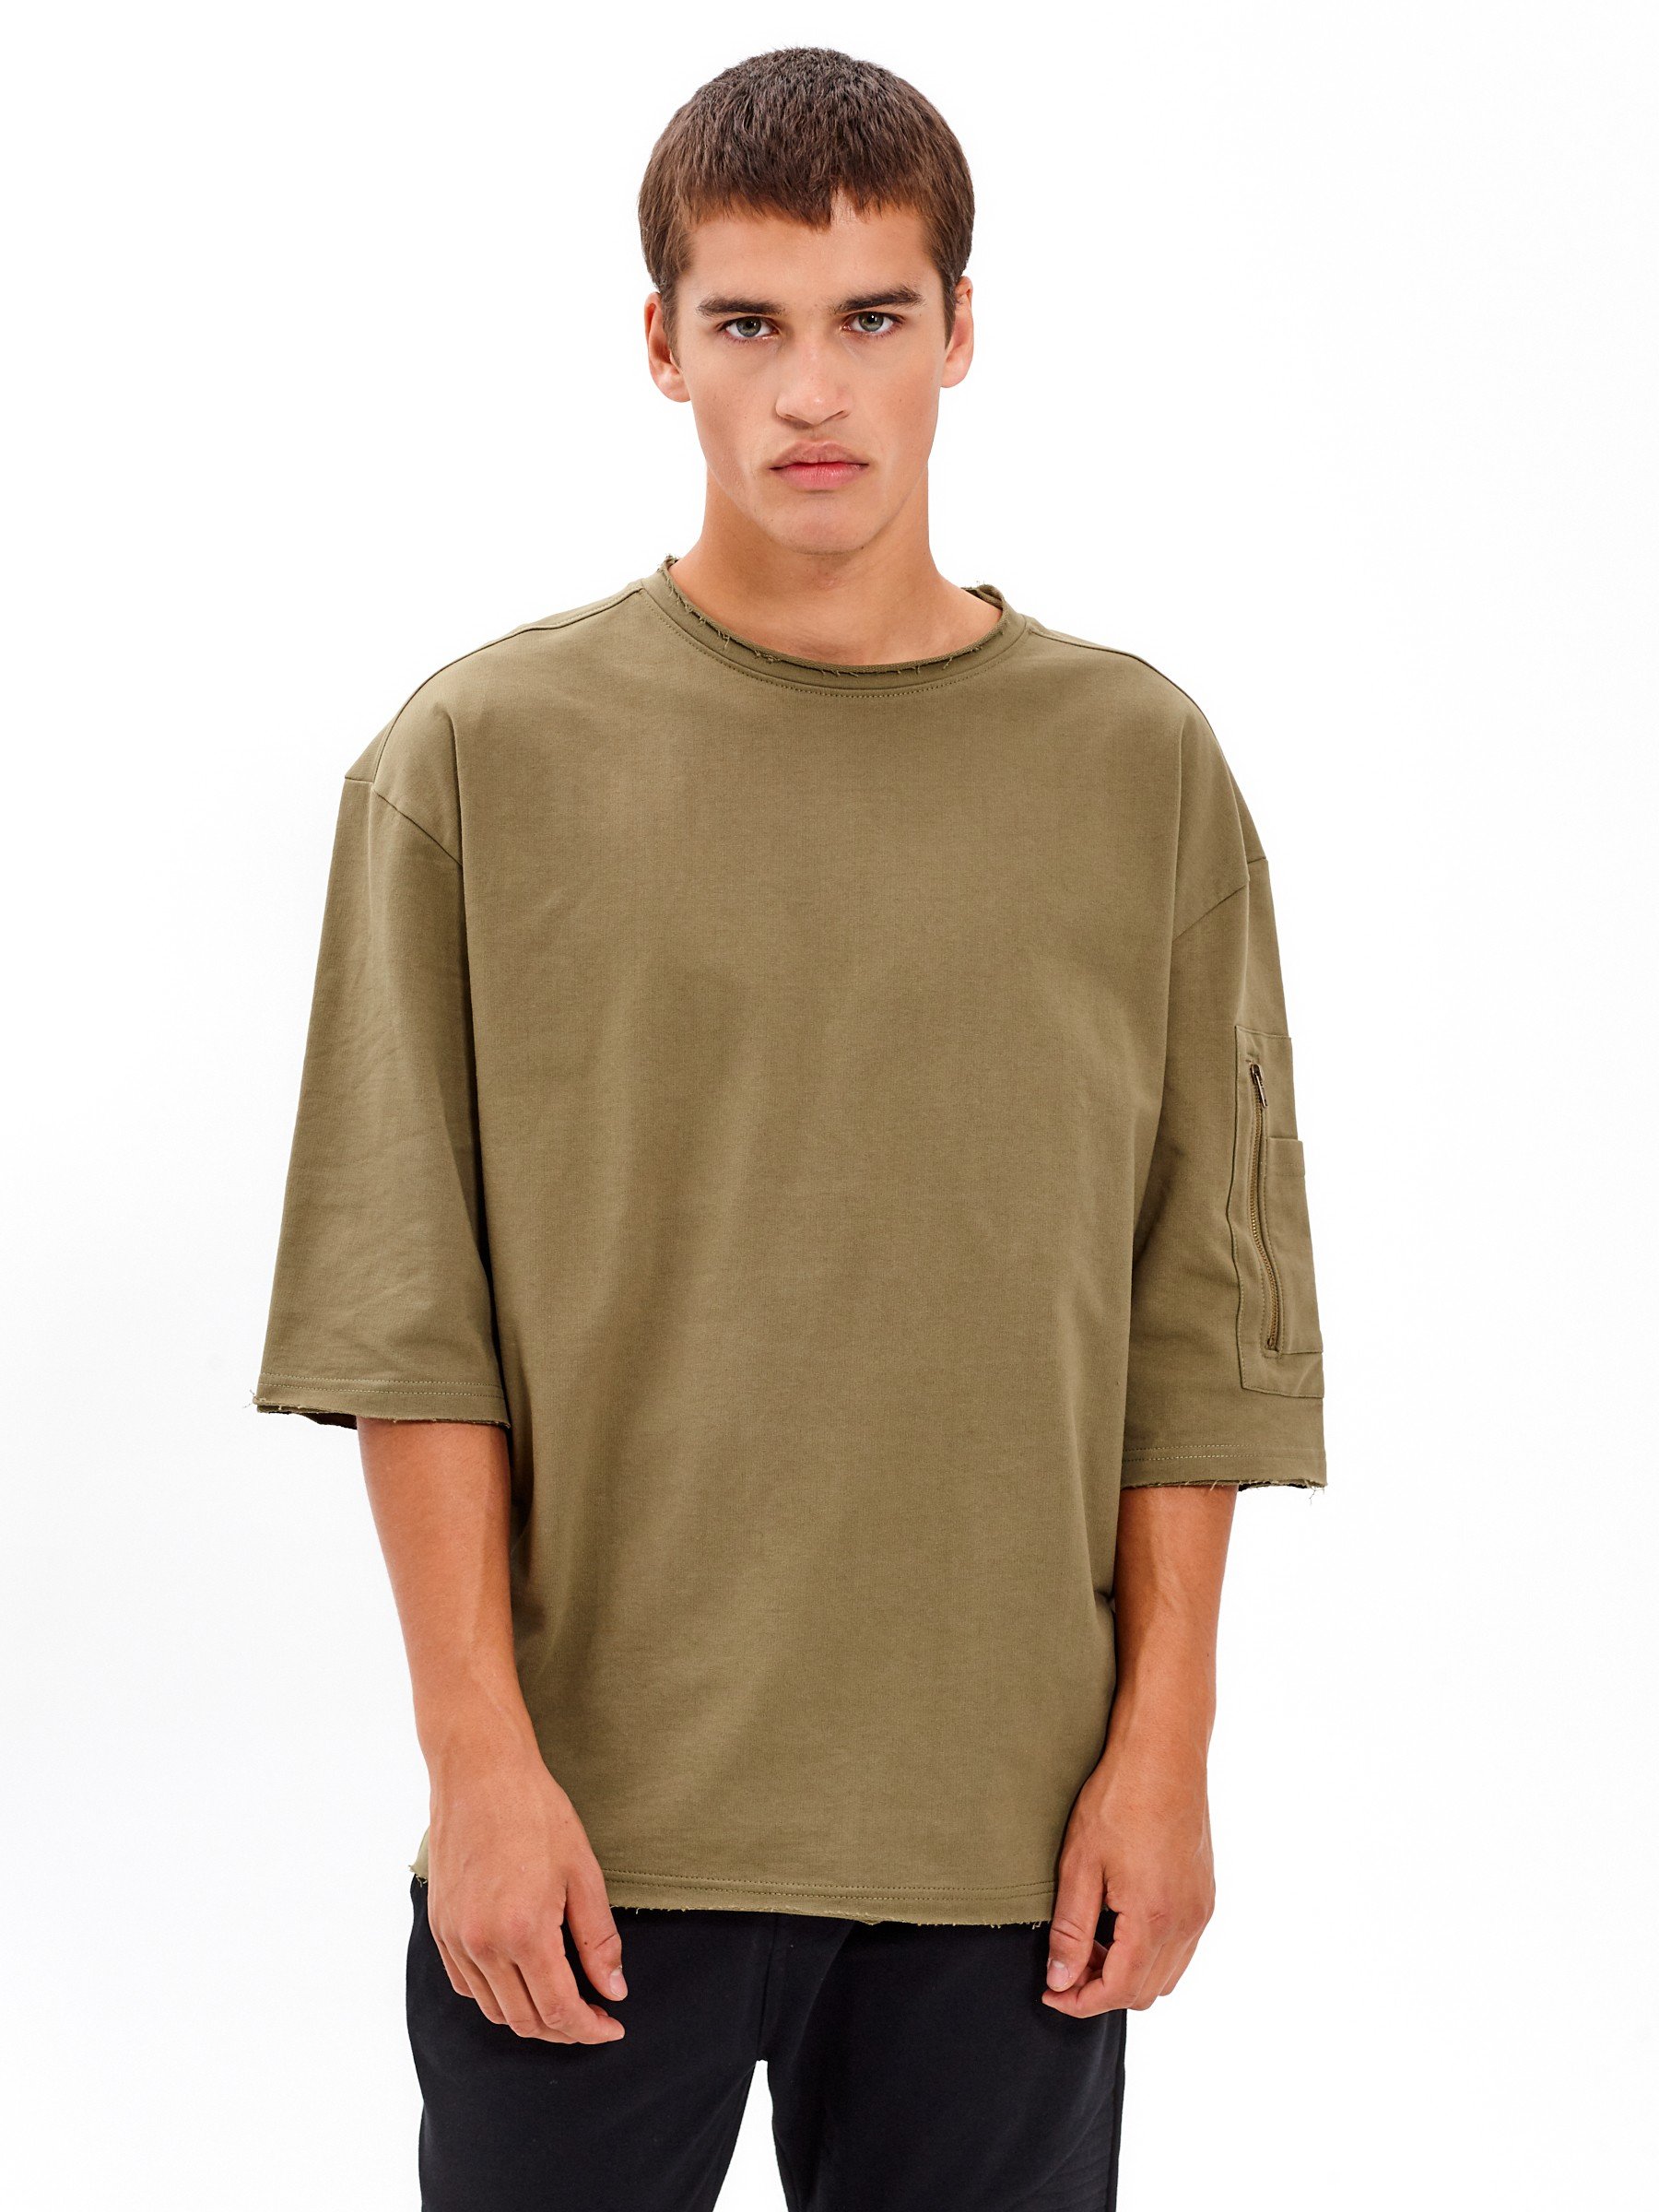 oversized t shirt fit